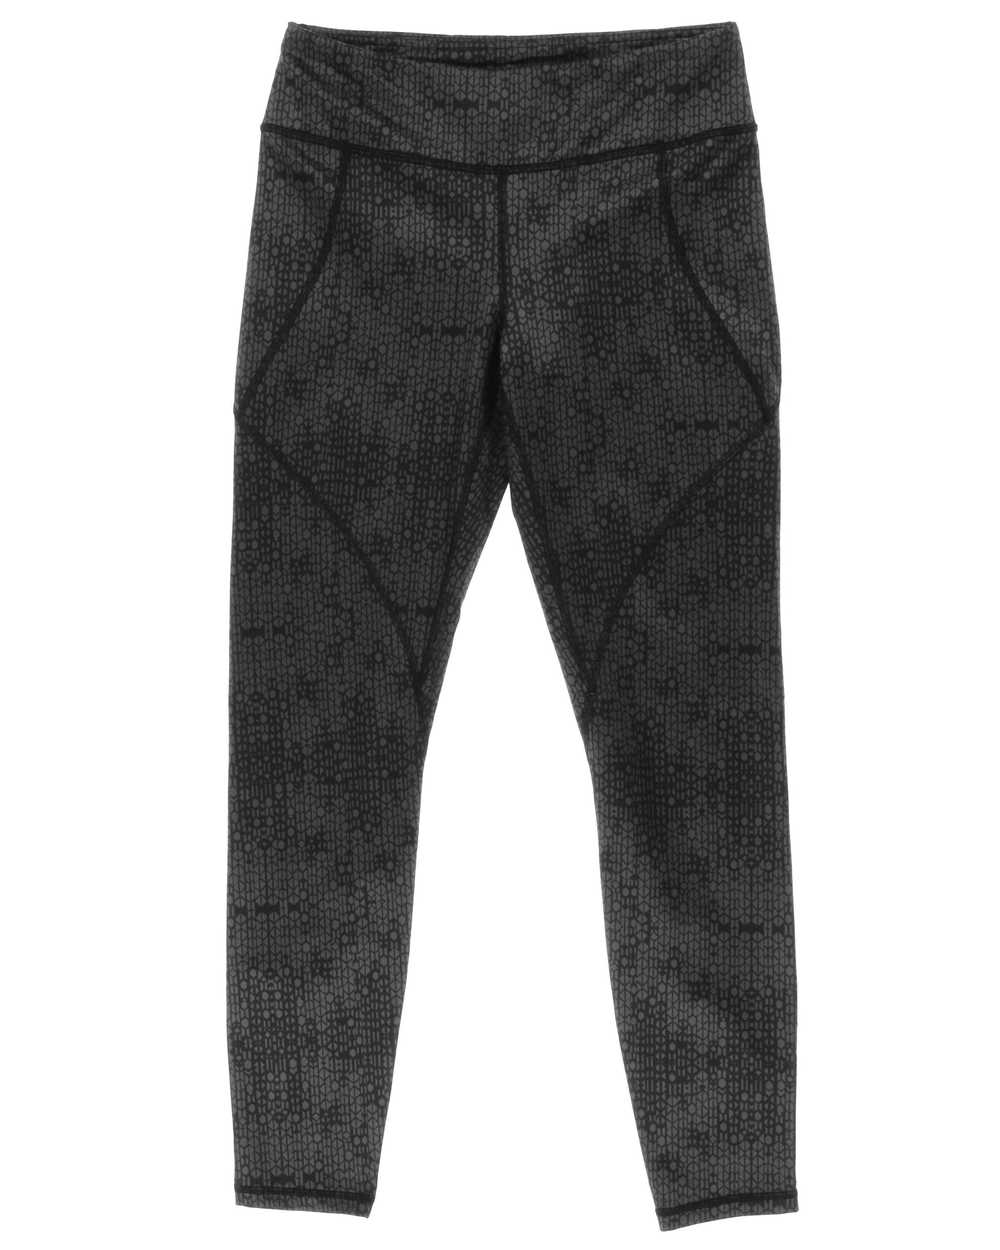 Patagonia - W's Centered Tights - image 1